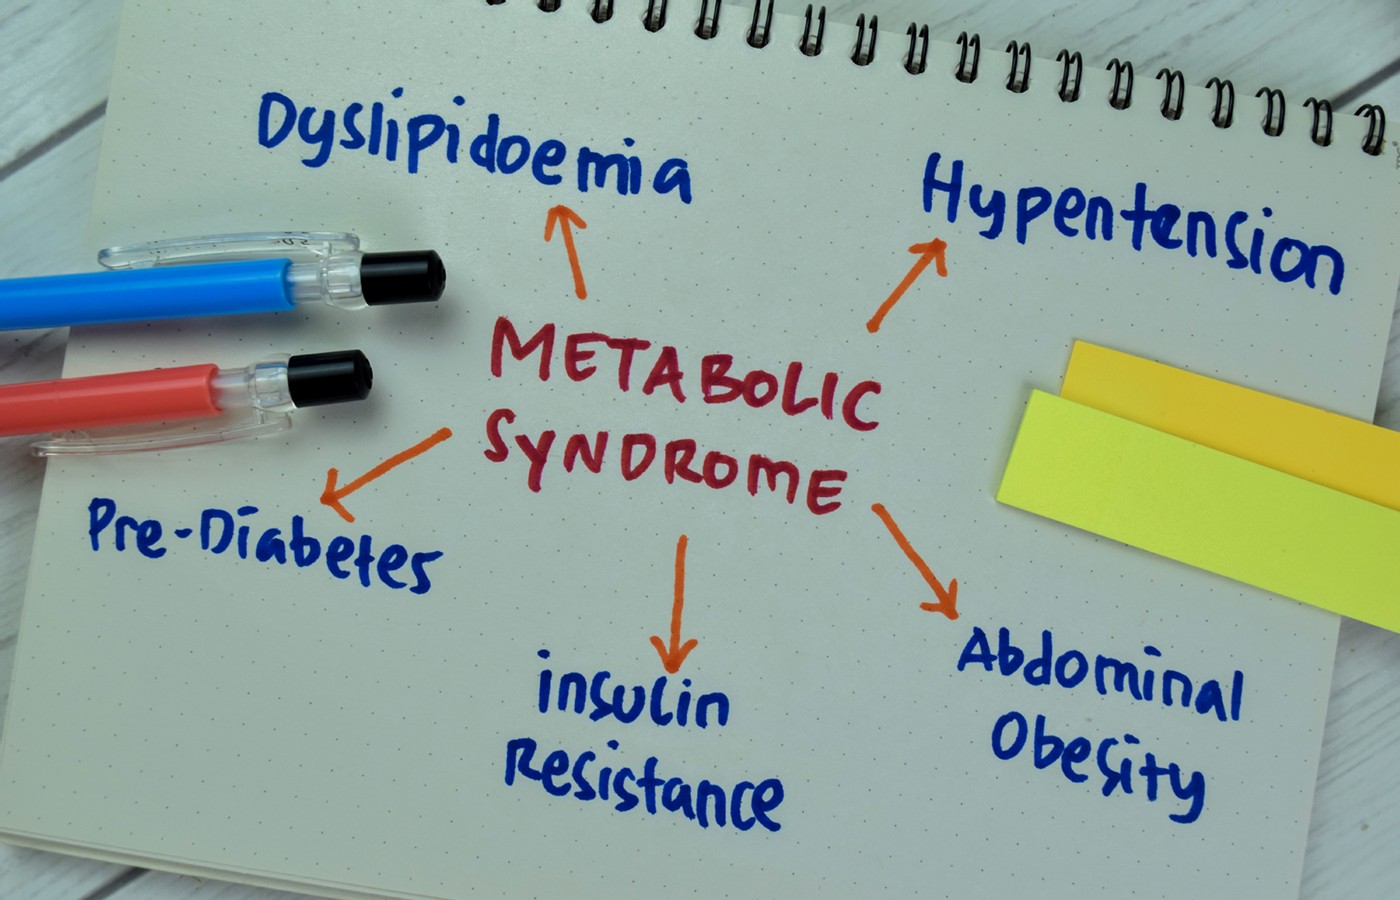 Metabolic Syndrome: An Ongoing Health Care Disaster